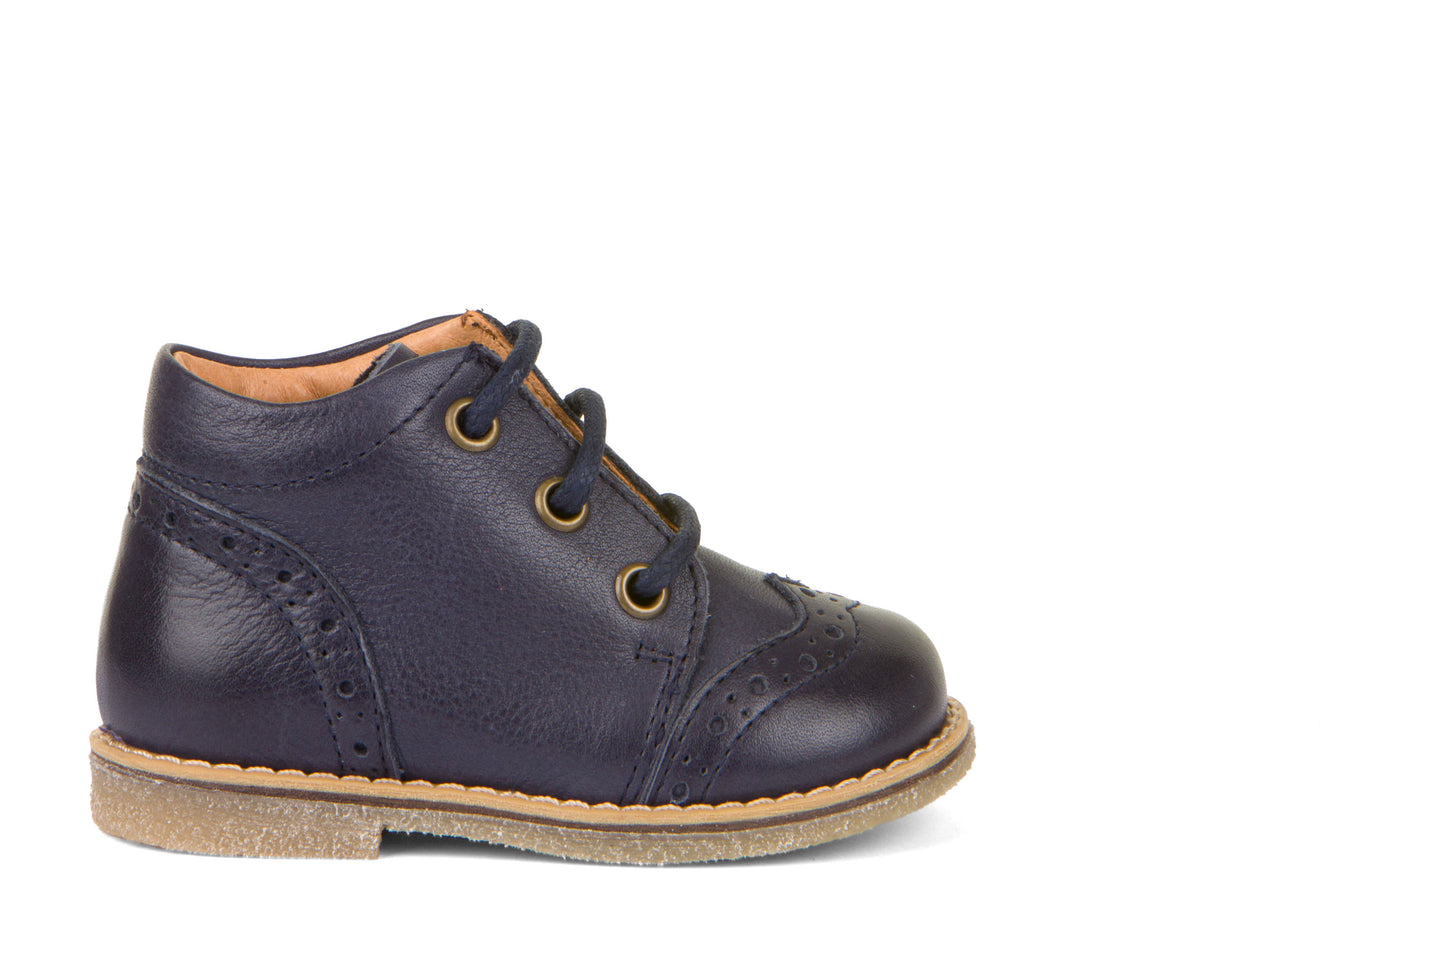 A boys boot by Froddo, style Coper G2130276-2 in Navy with lace-up fastening. Right Side view.